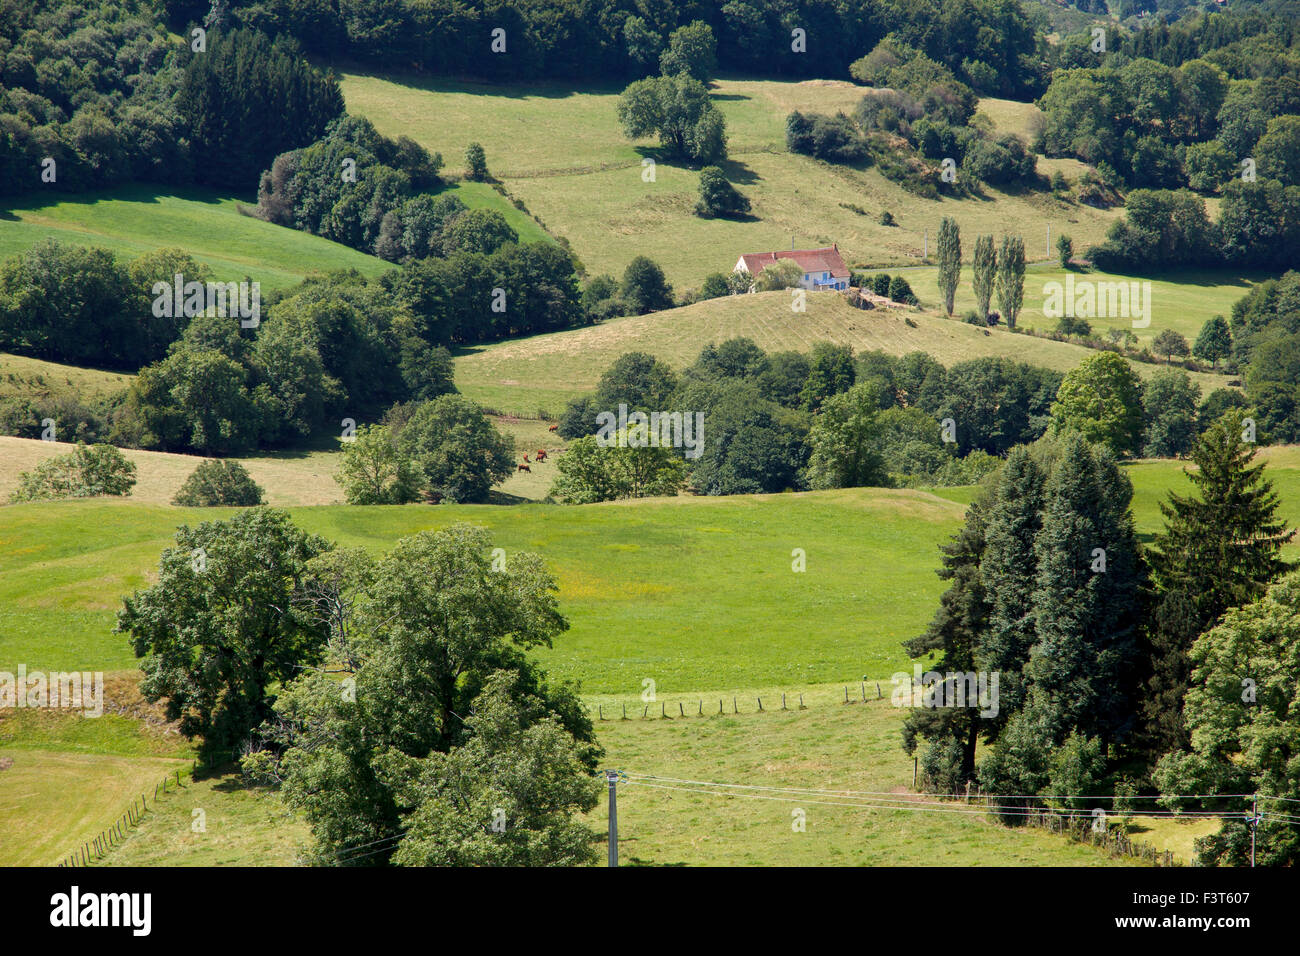 A view into the surrounding countryside from the town of La Tour d'Auvergne, Sancy, Puy-de-Dome, France Stock Photo